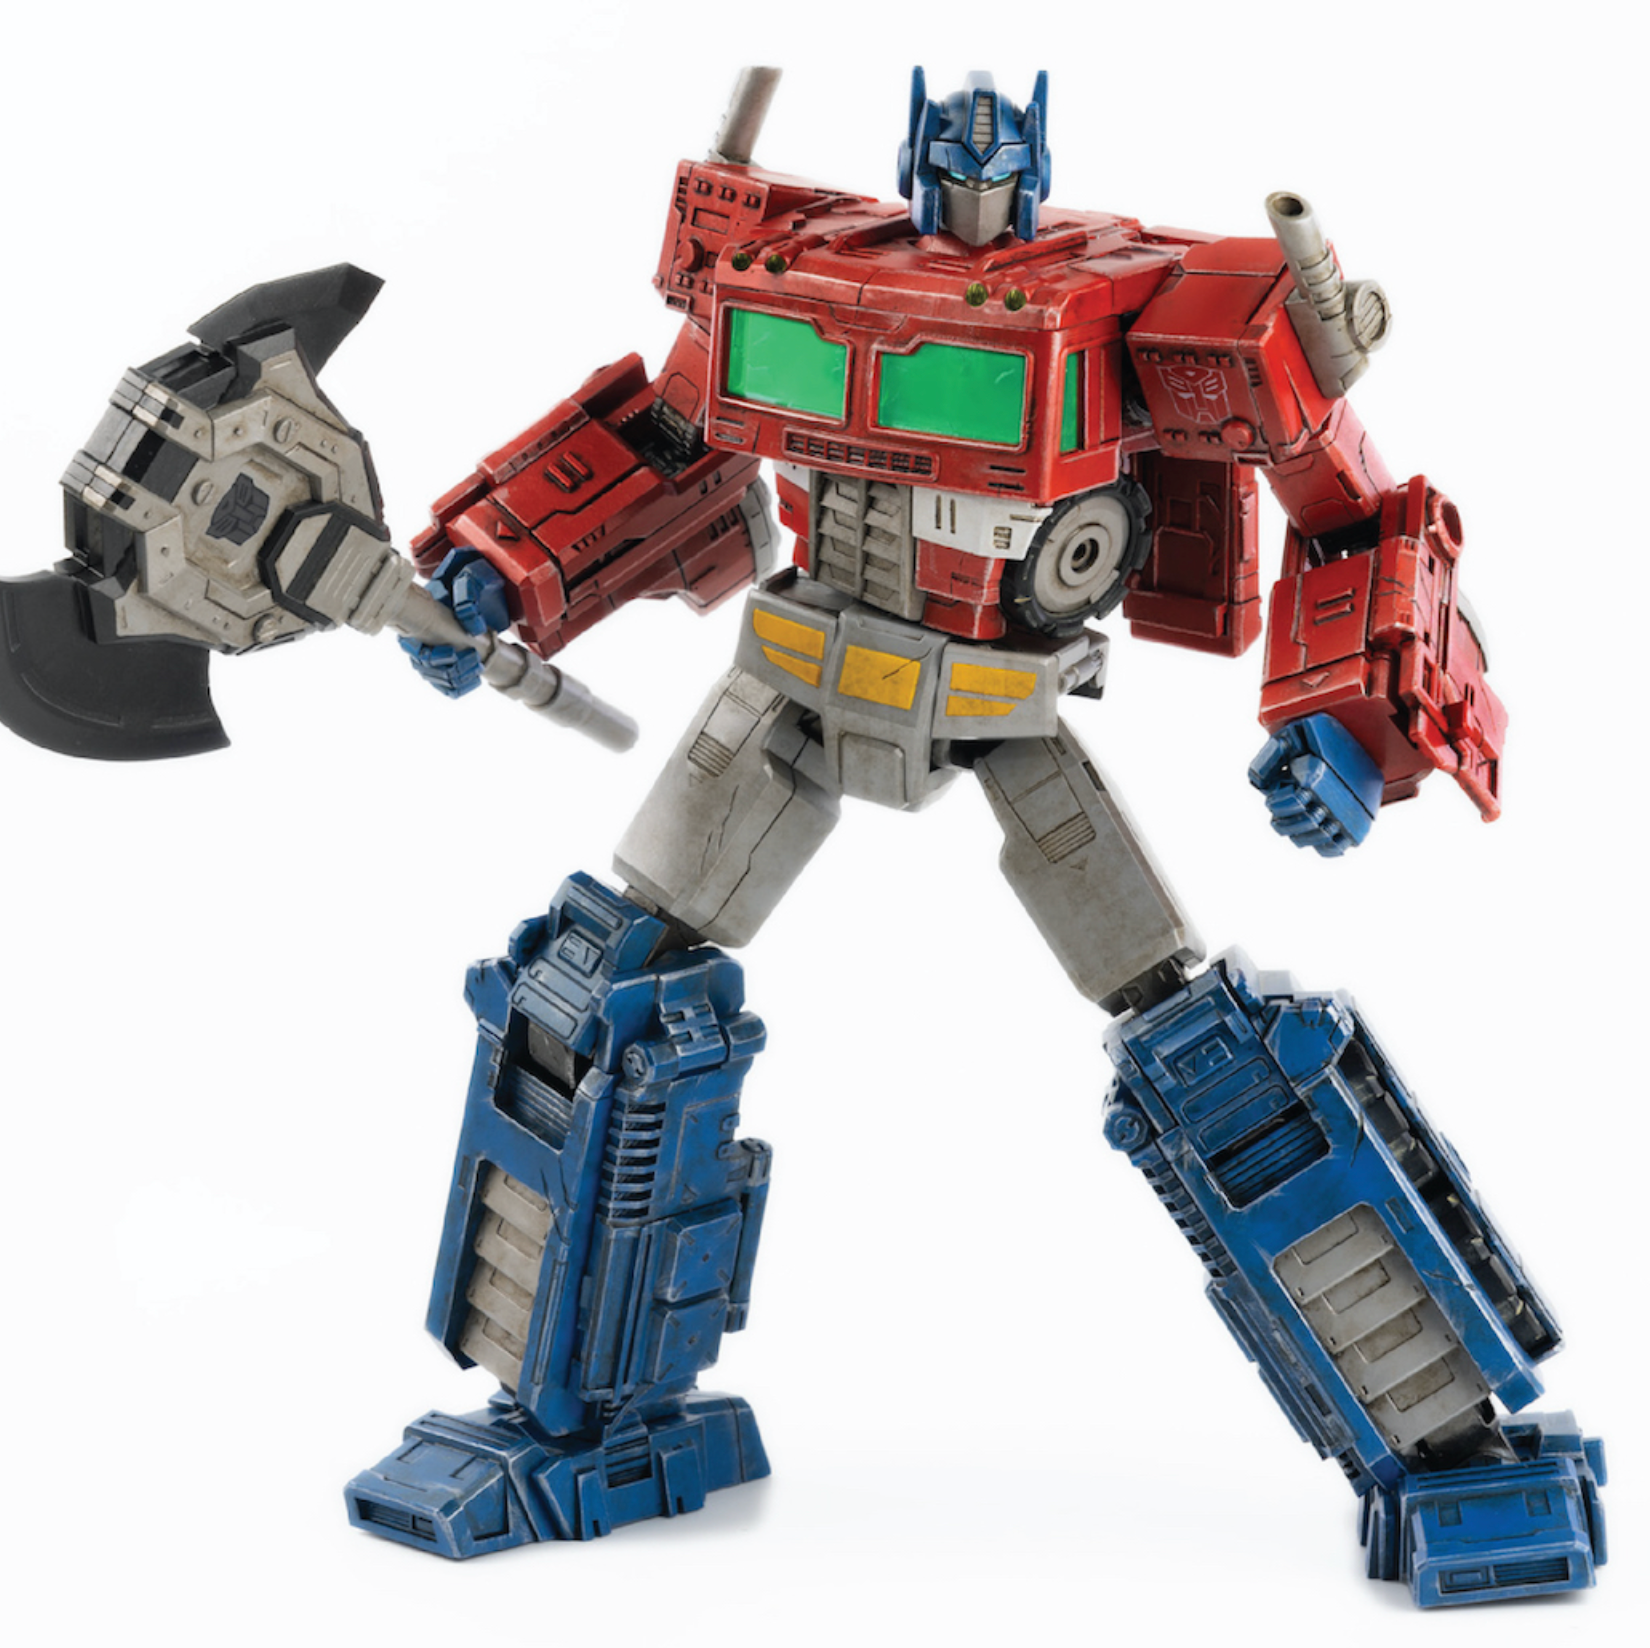 Transformers: War For Cybertron Trilogy DLX Optimus Prime 10 inch action figure by ThreeZero Available Now ! ! !